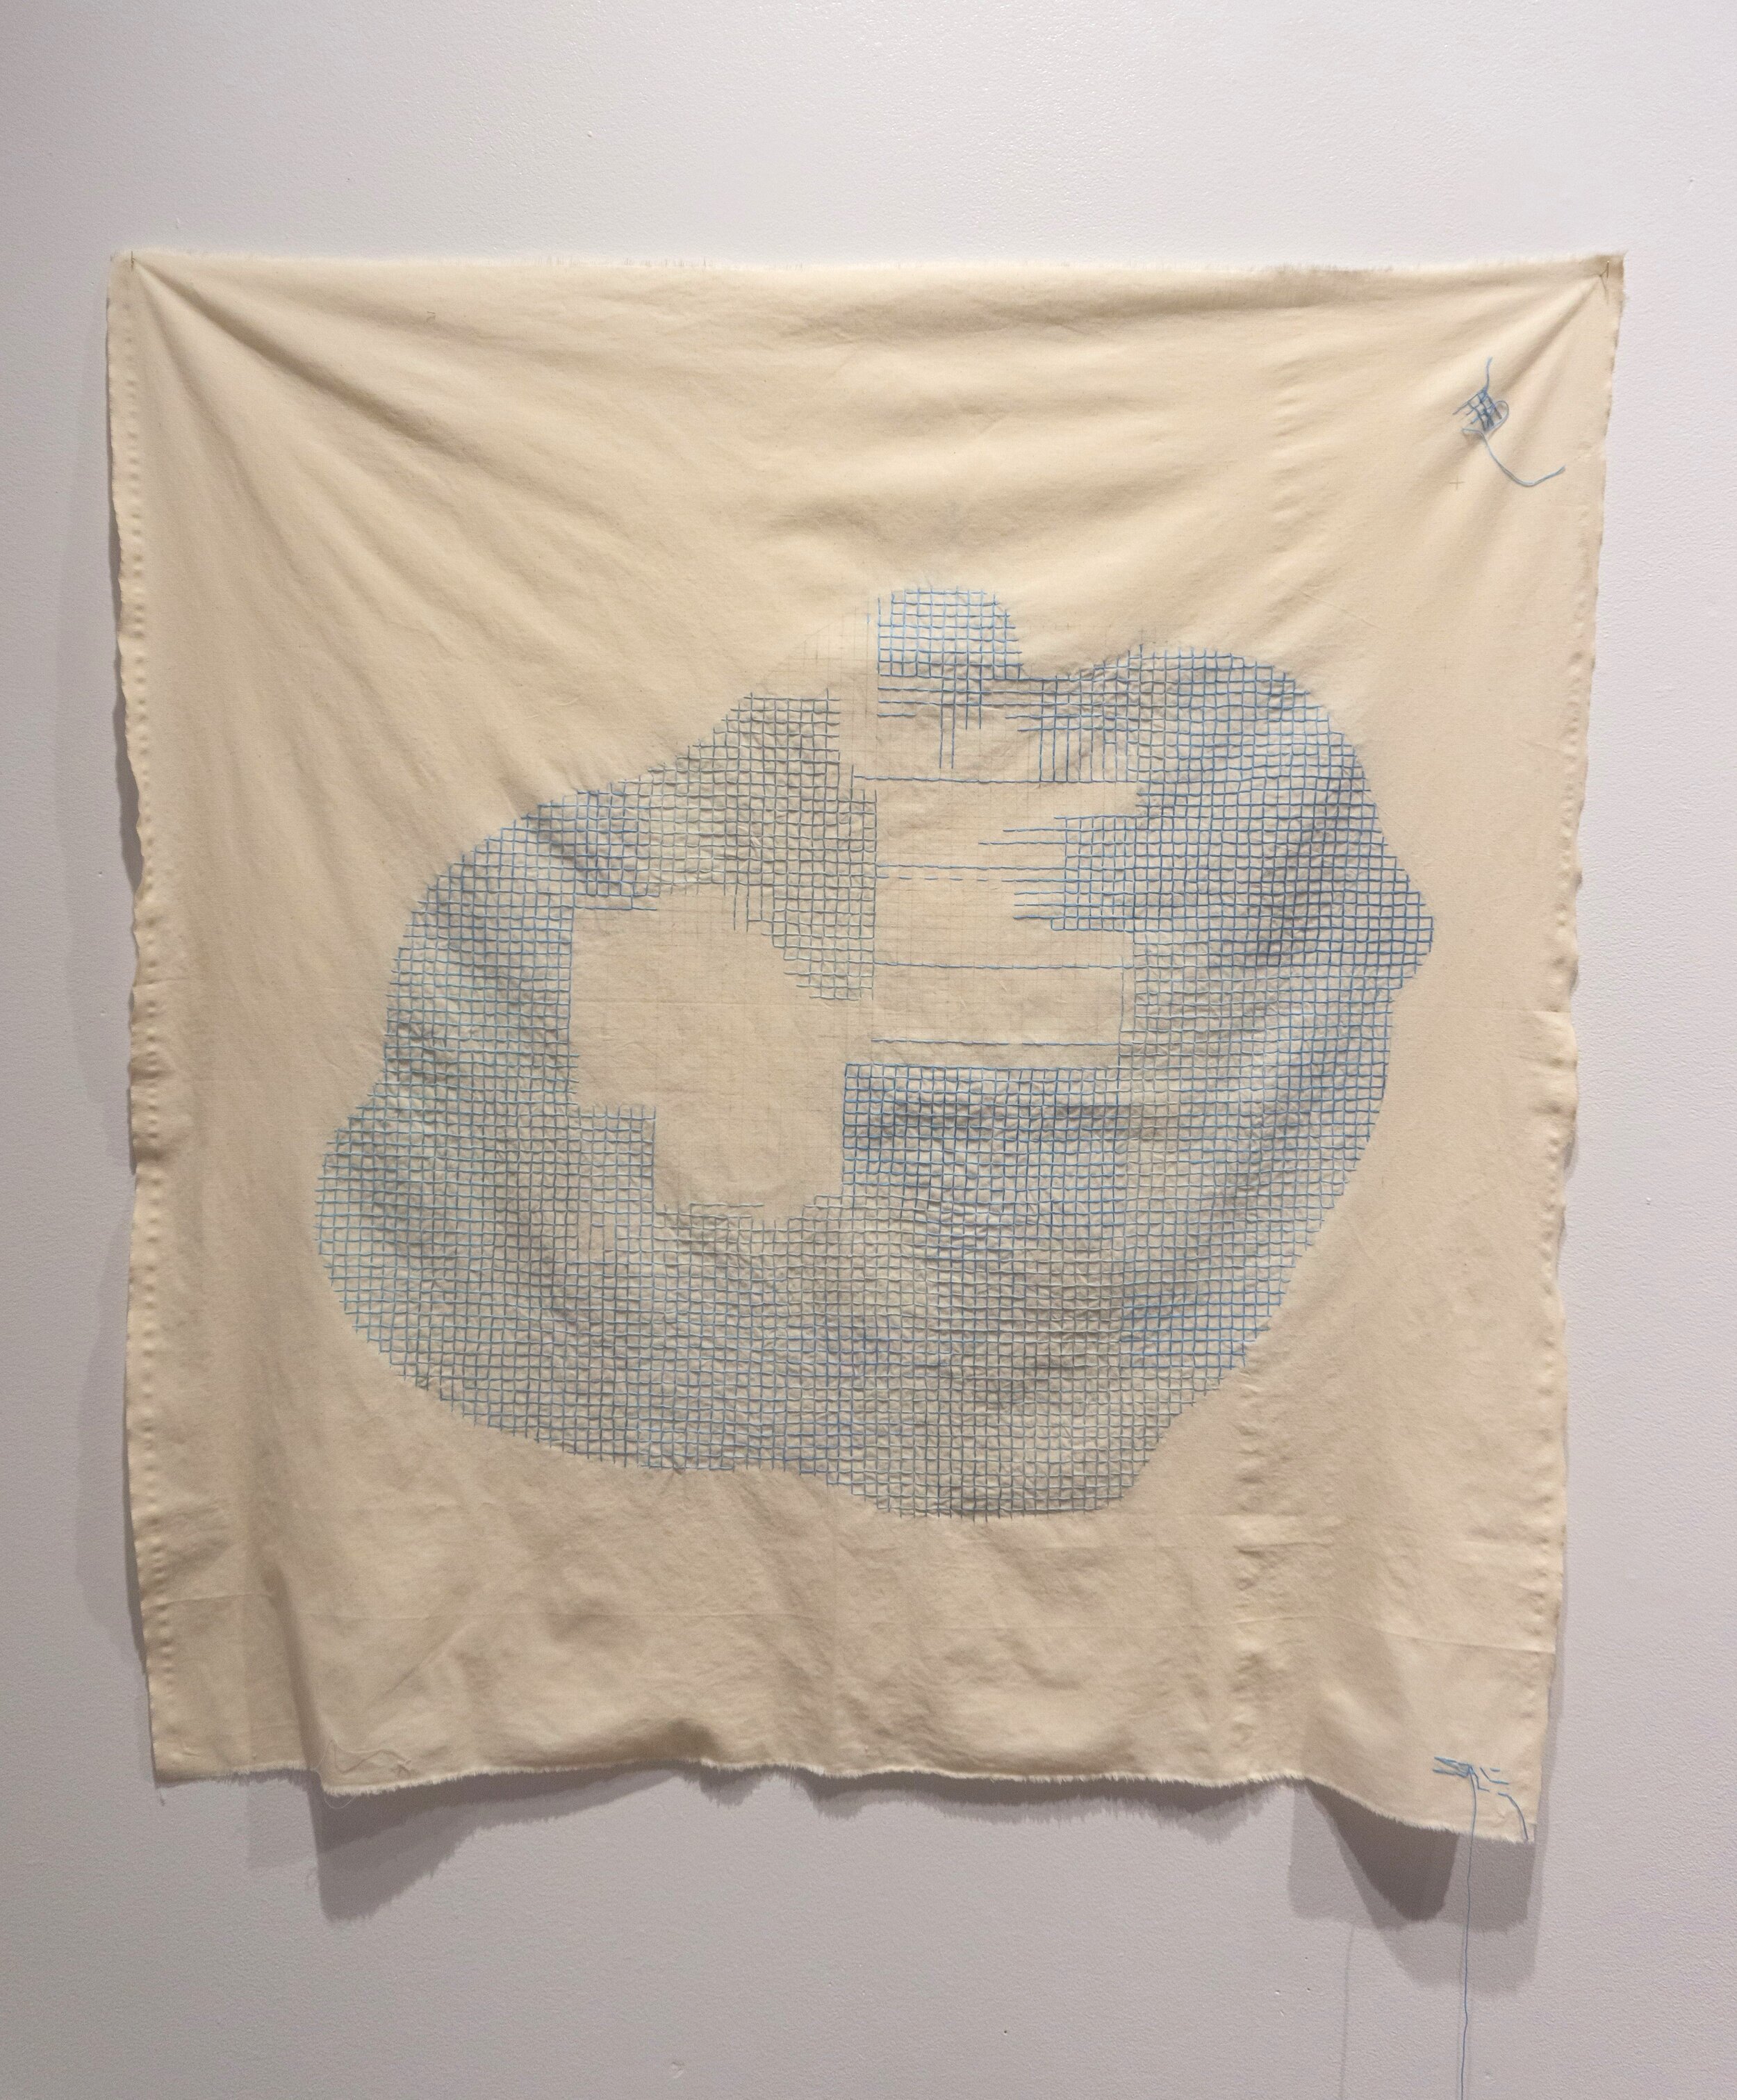 The Cloud, 2019, Embroidery thread and graphite on cotton, 38" x 40"